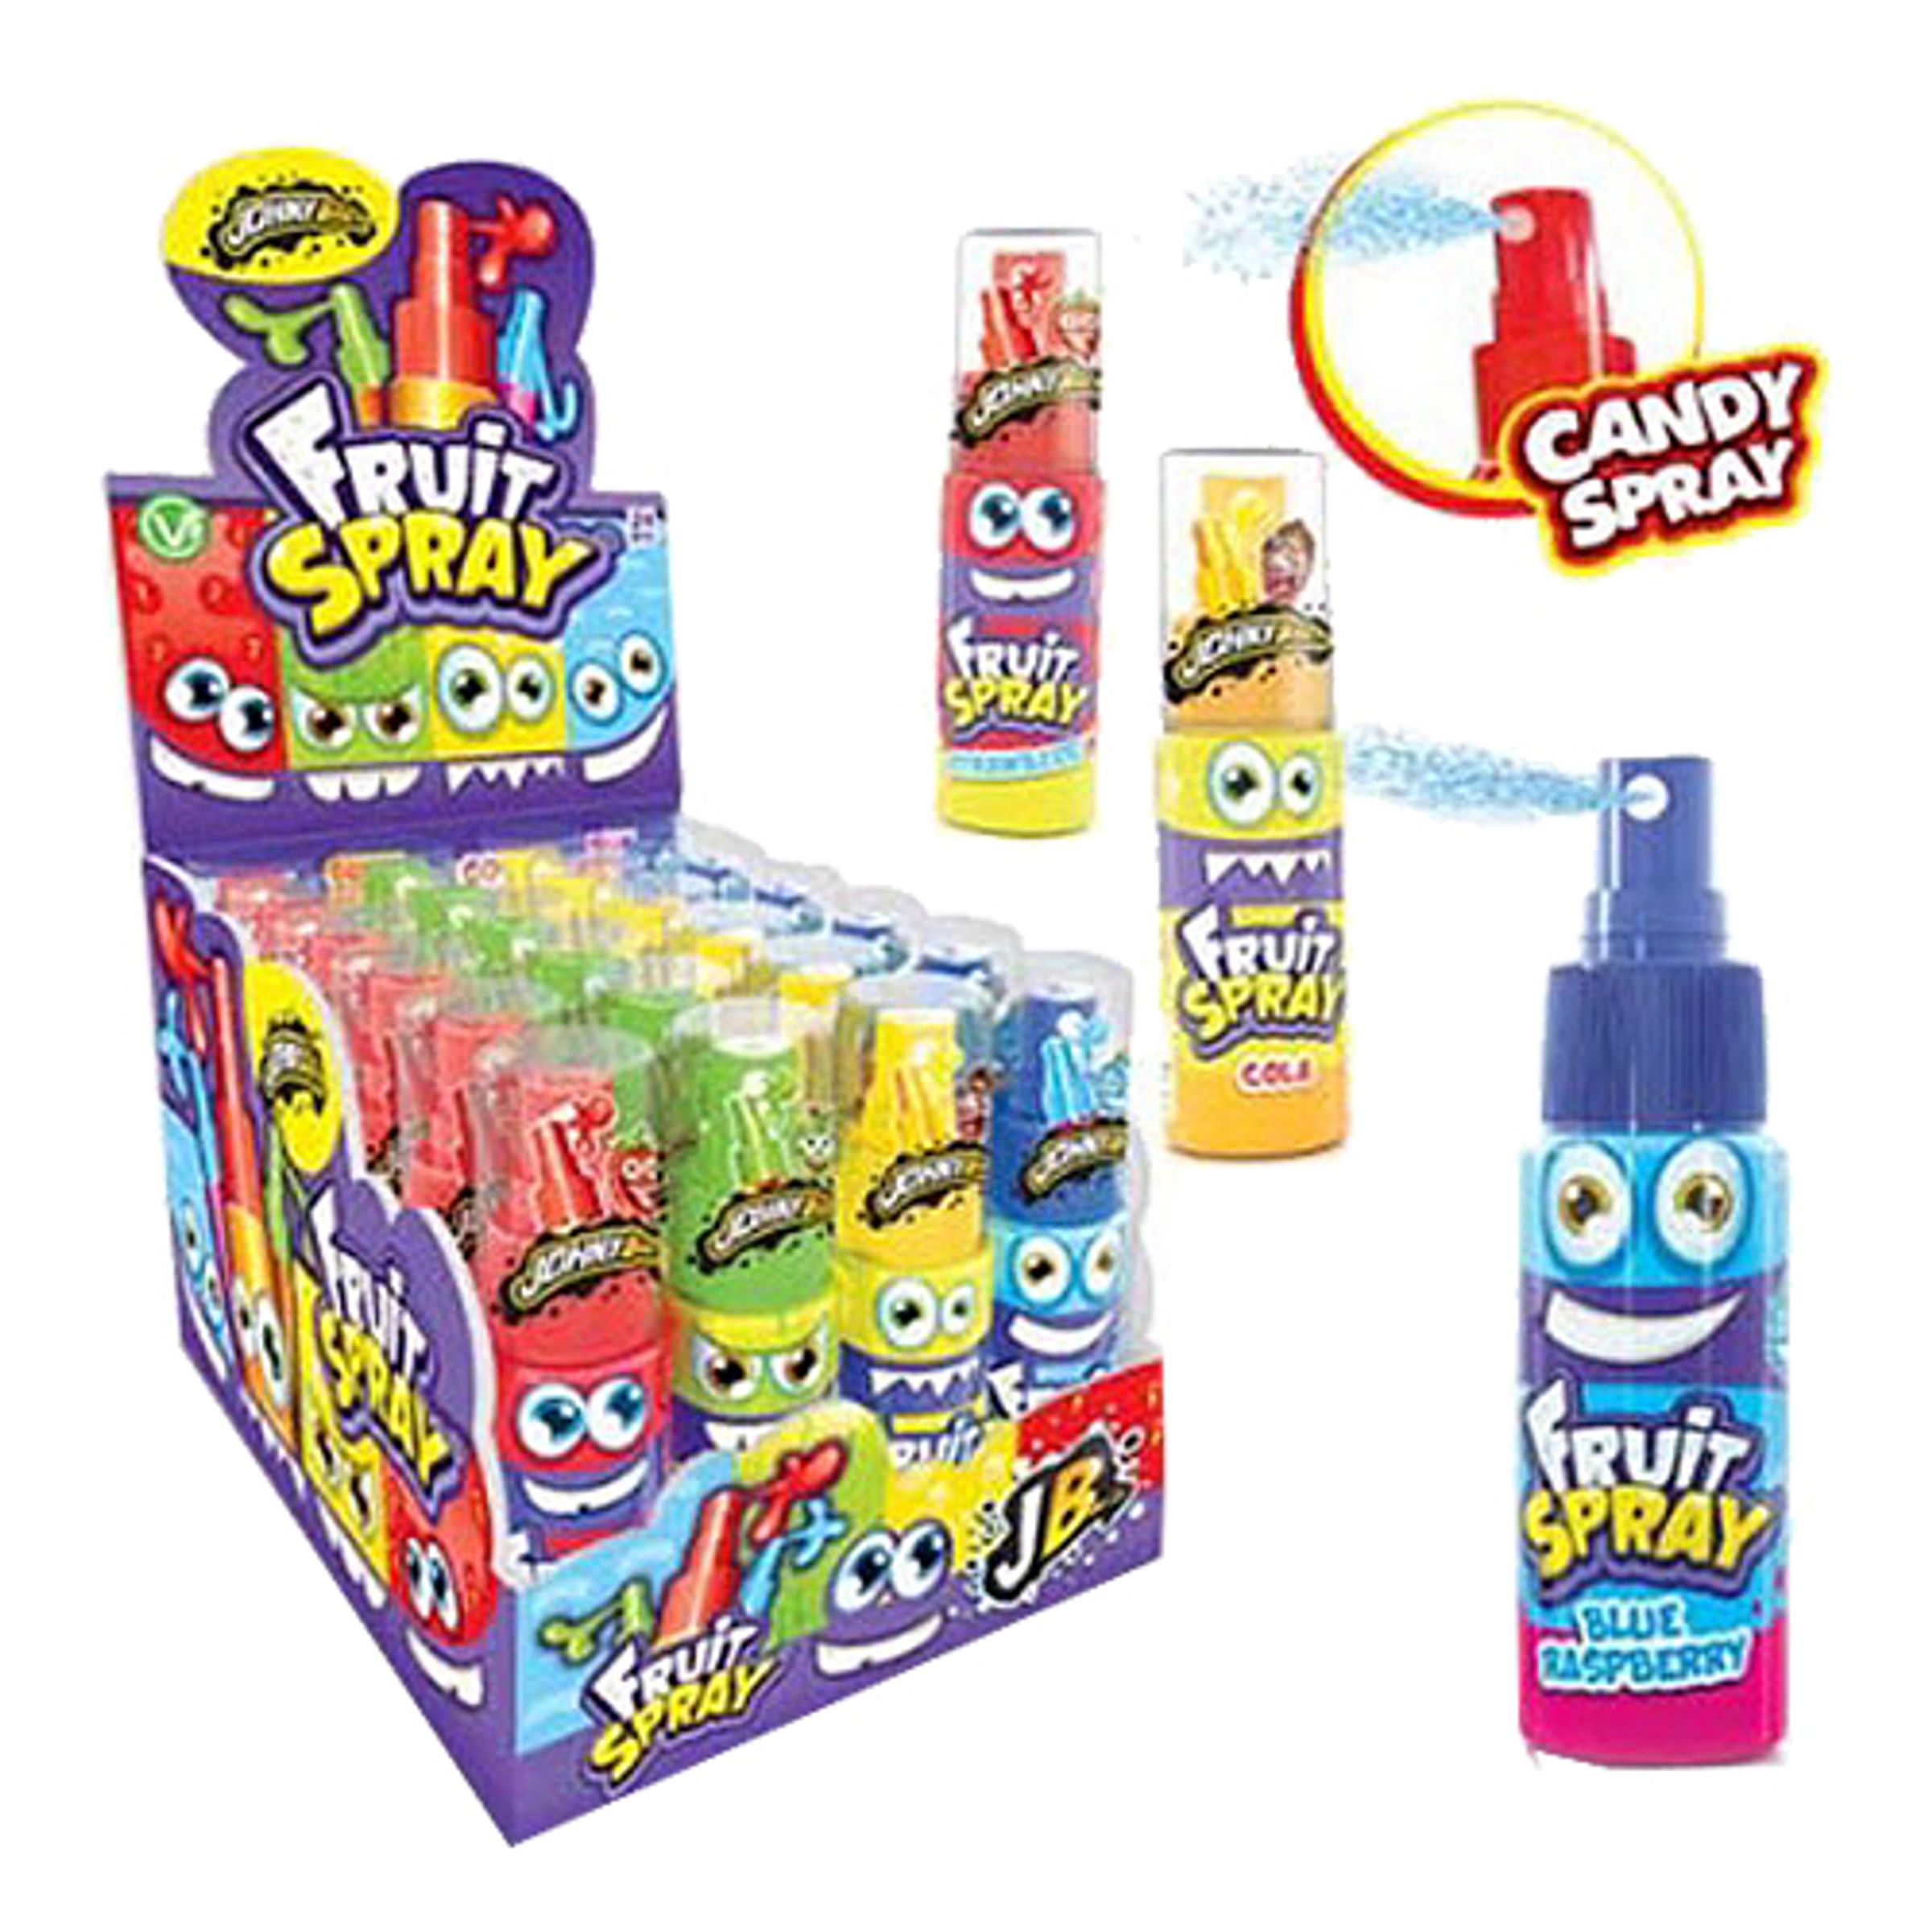 Candy Spray Godis Storpack - 24-pack